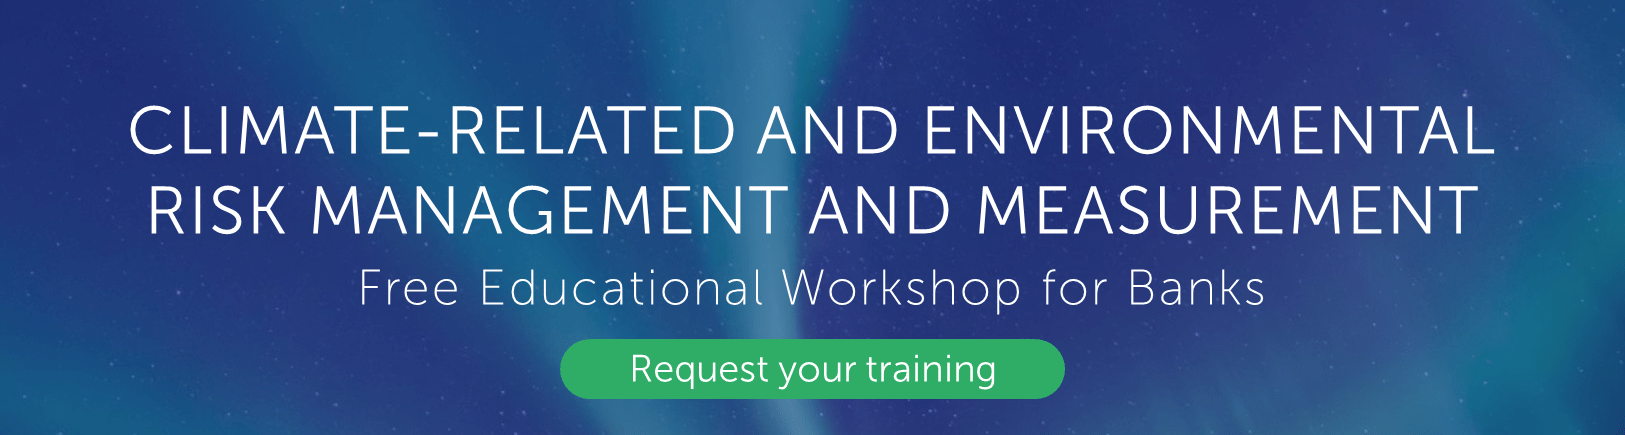 Finalyse climate-related and environmental risk measurement and management free educational workshop